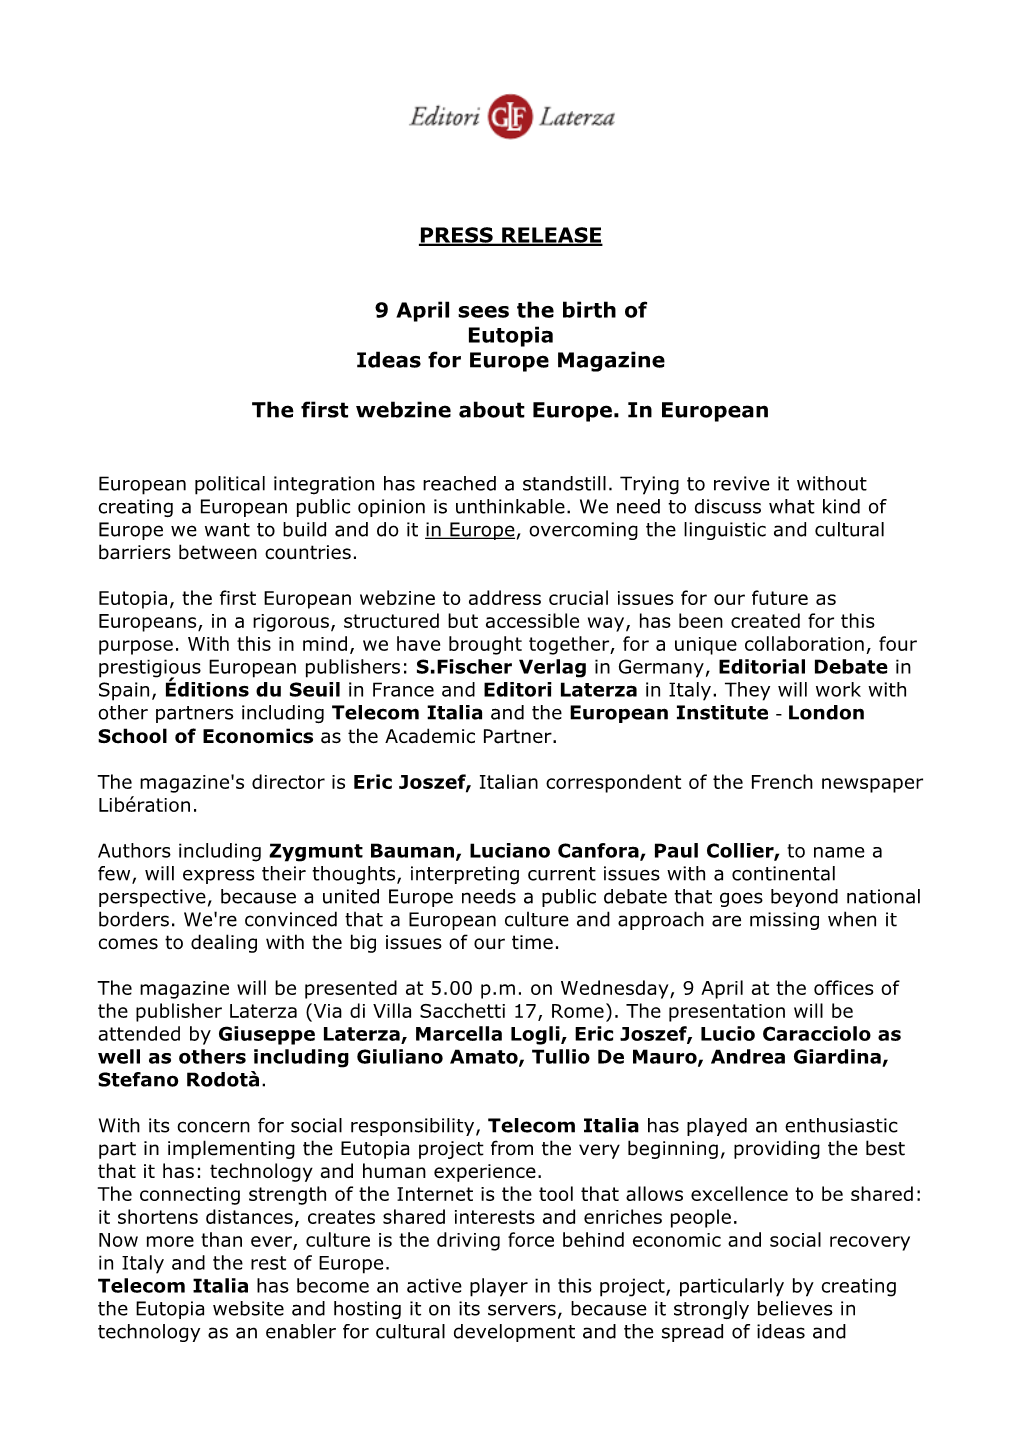 PRESS RELEASE 9 April Sees the Birth of Eutopia Ideas for Europe